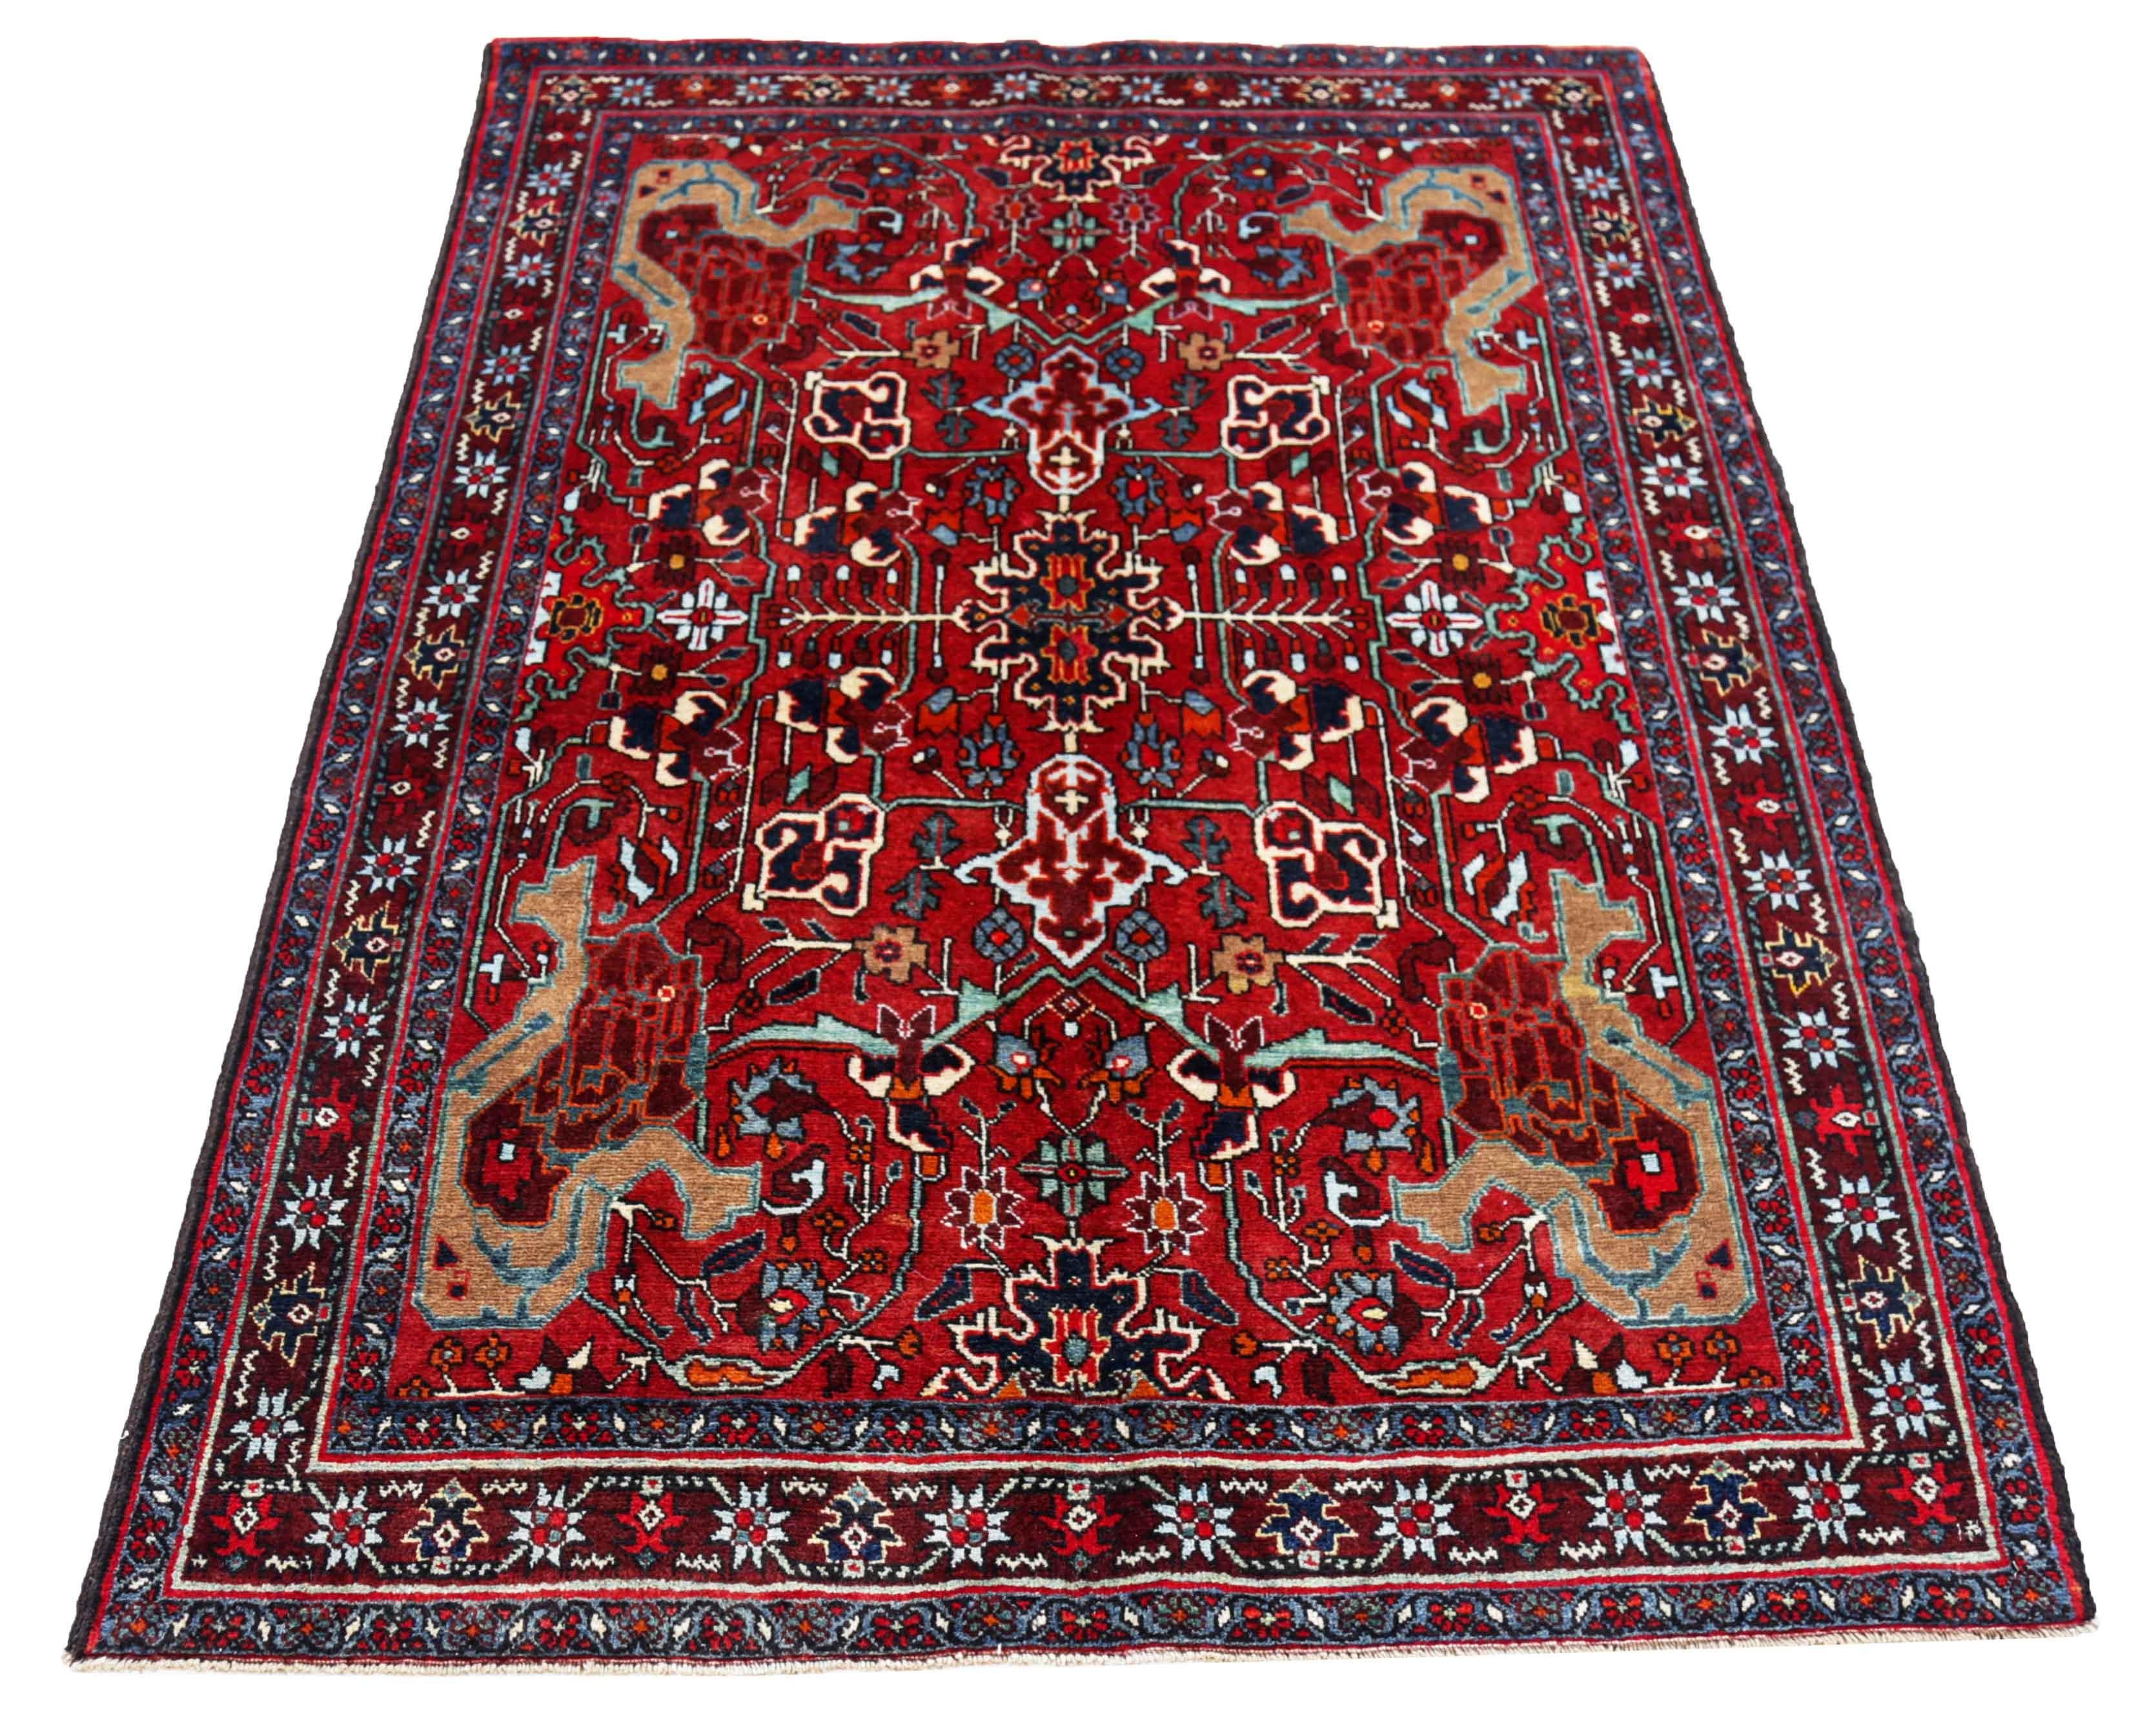 Antique Persian area rug handwoven from the finest sheep’s wool. It’s colored with all-natural vegetable dyes that are safe for humans and pets. It’s a traditional Heriz design handwoven by expert artisans. It’s a lovely area rug that can be